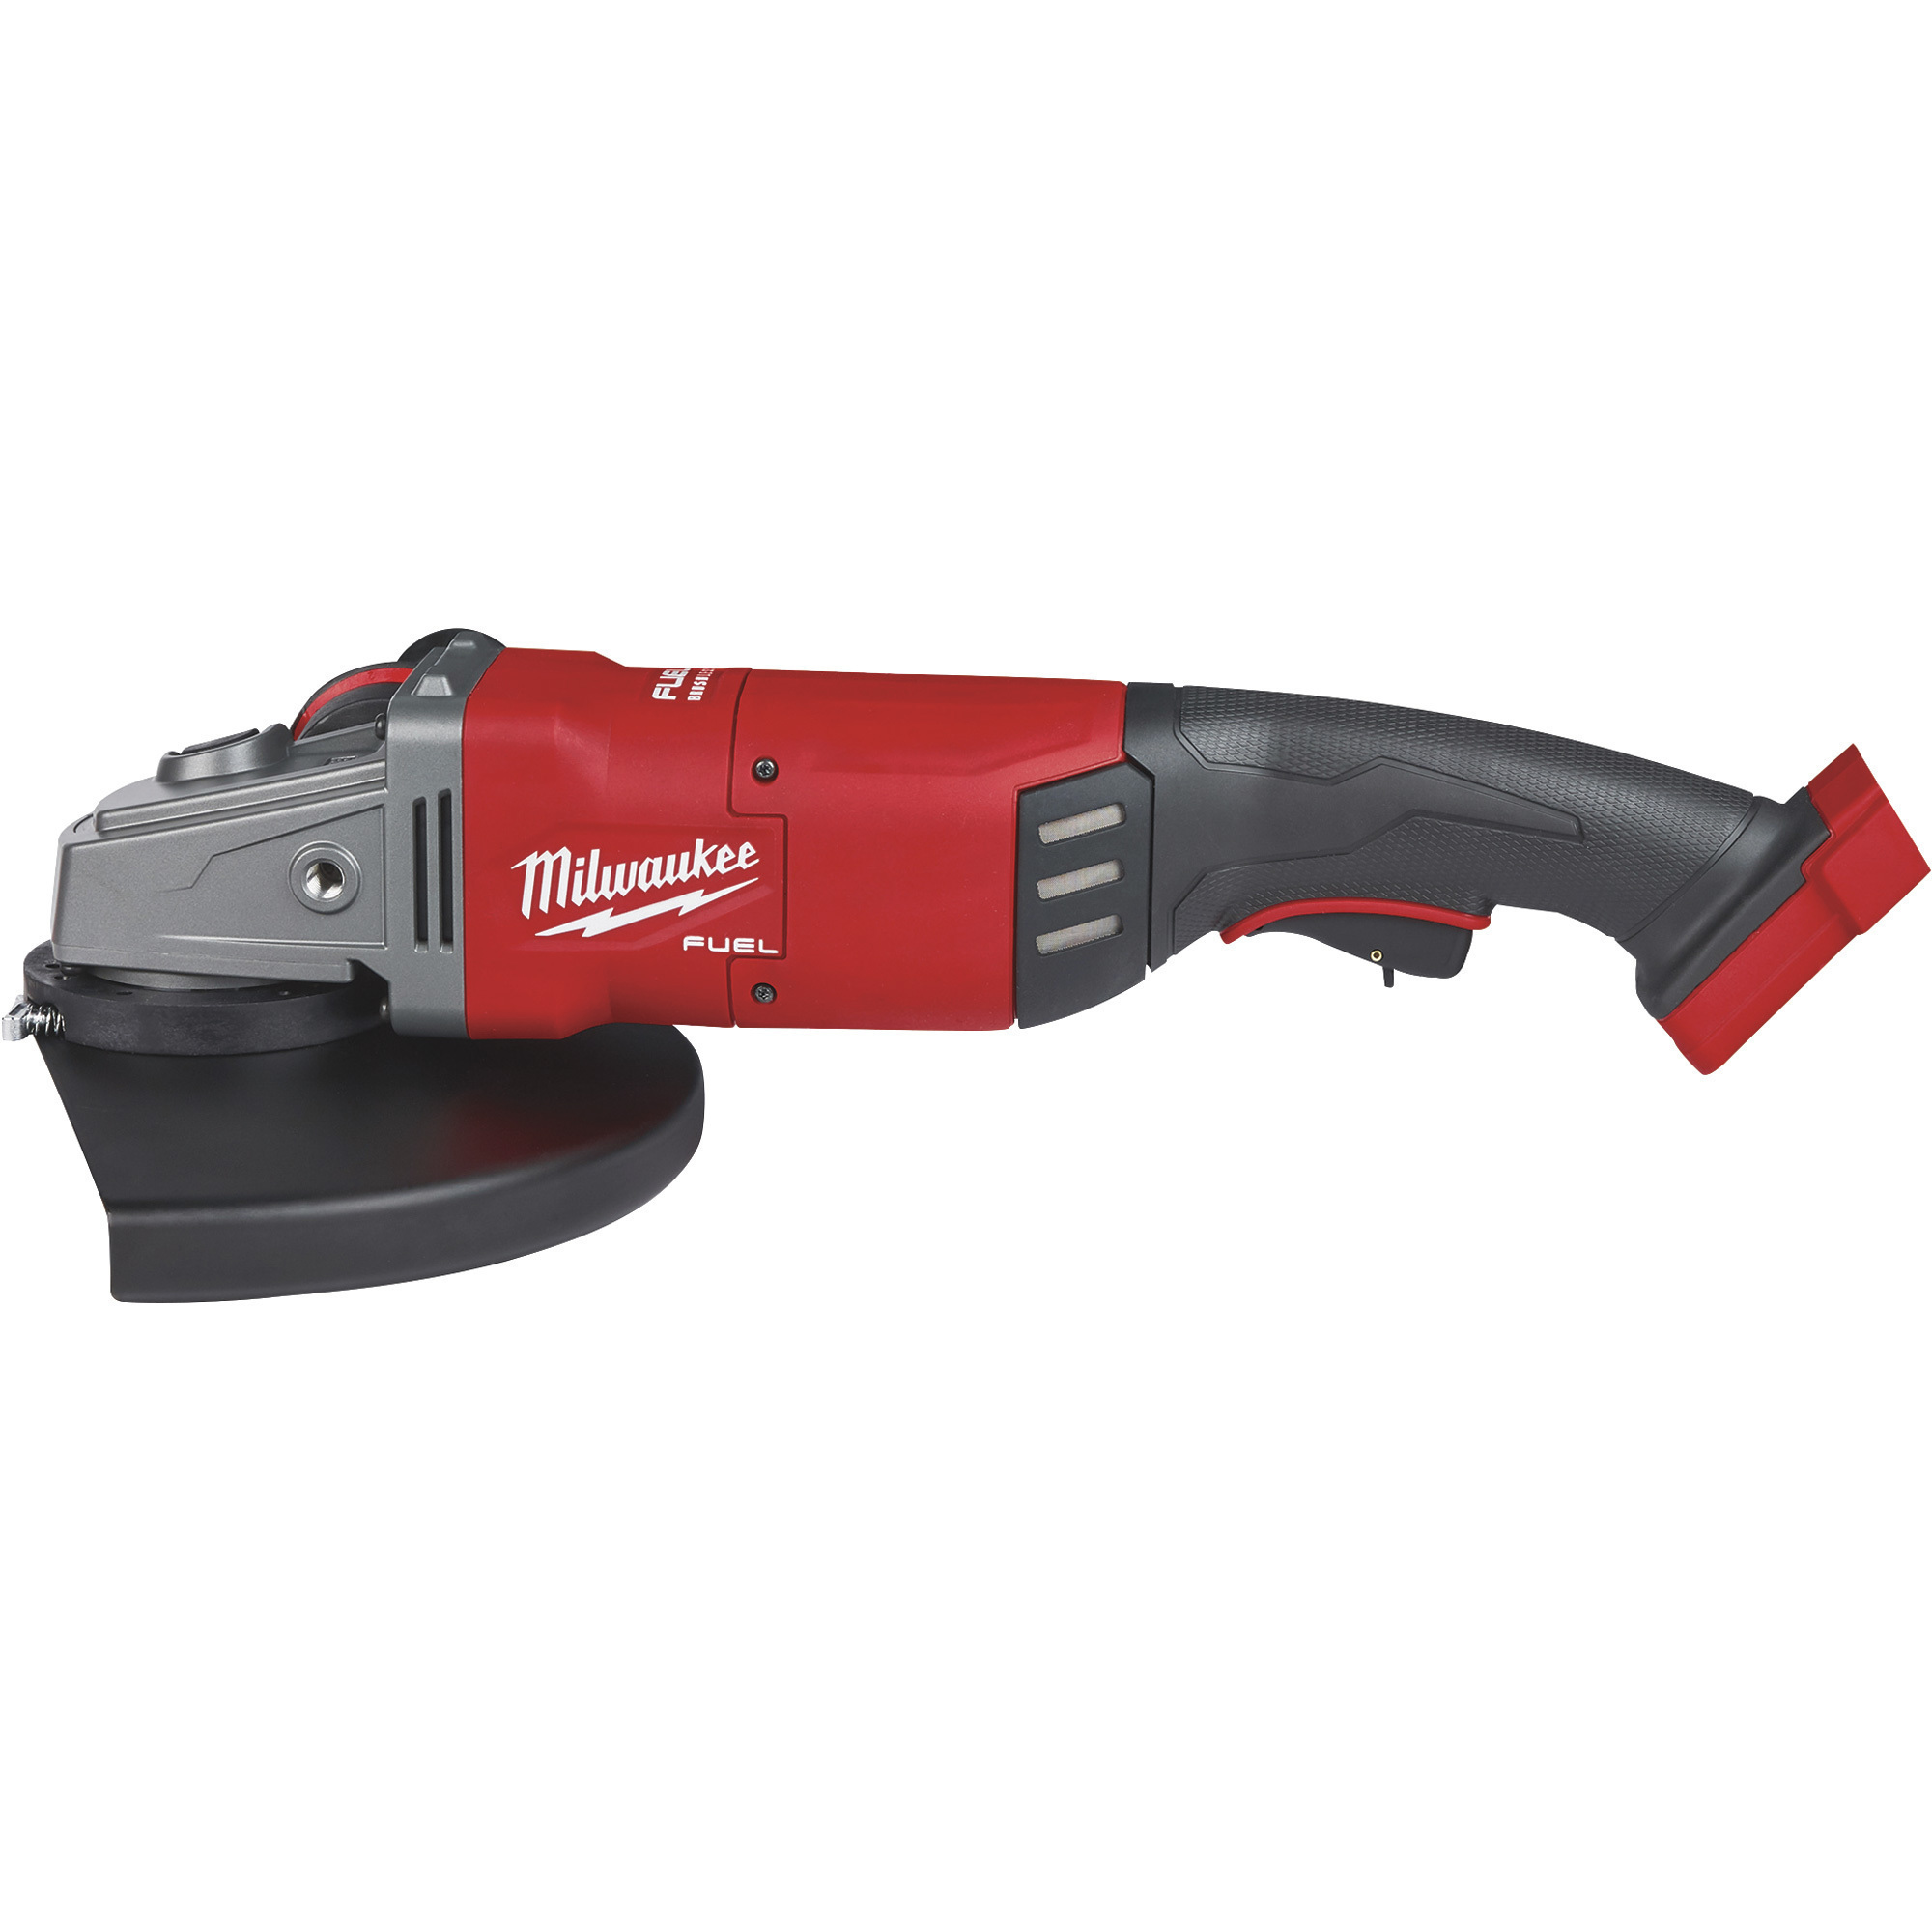 M18 FUEL Cordless 7Inch / 9Inch Large Angle Grinder — Tool Only, Model - Milwaukee 2785-20